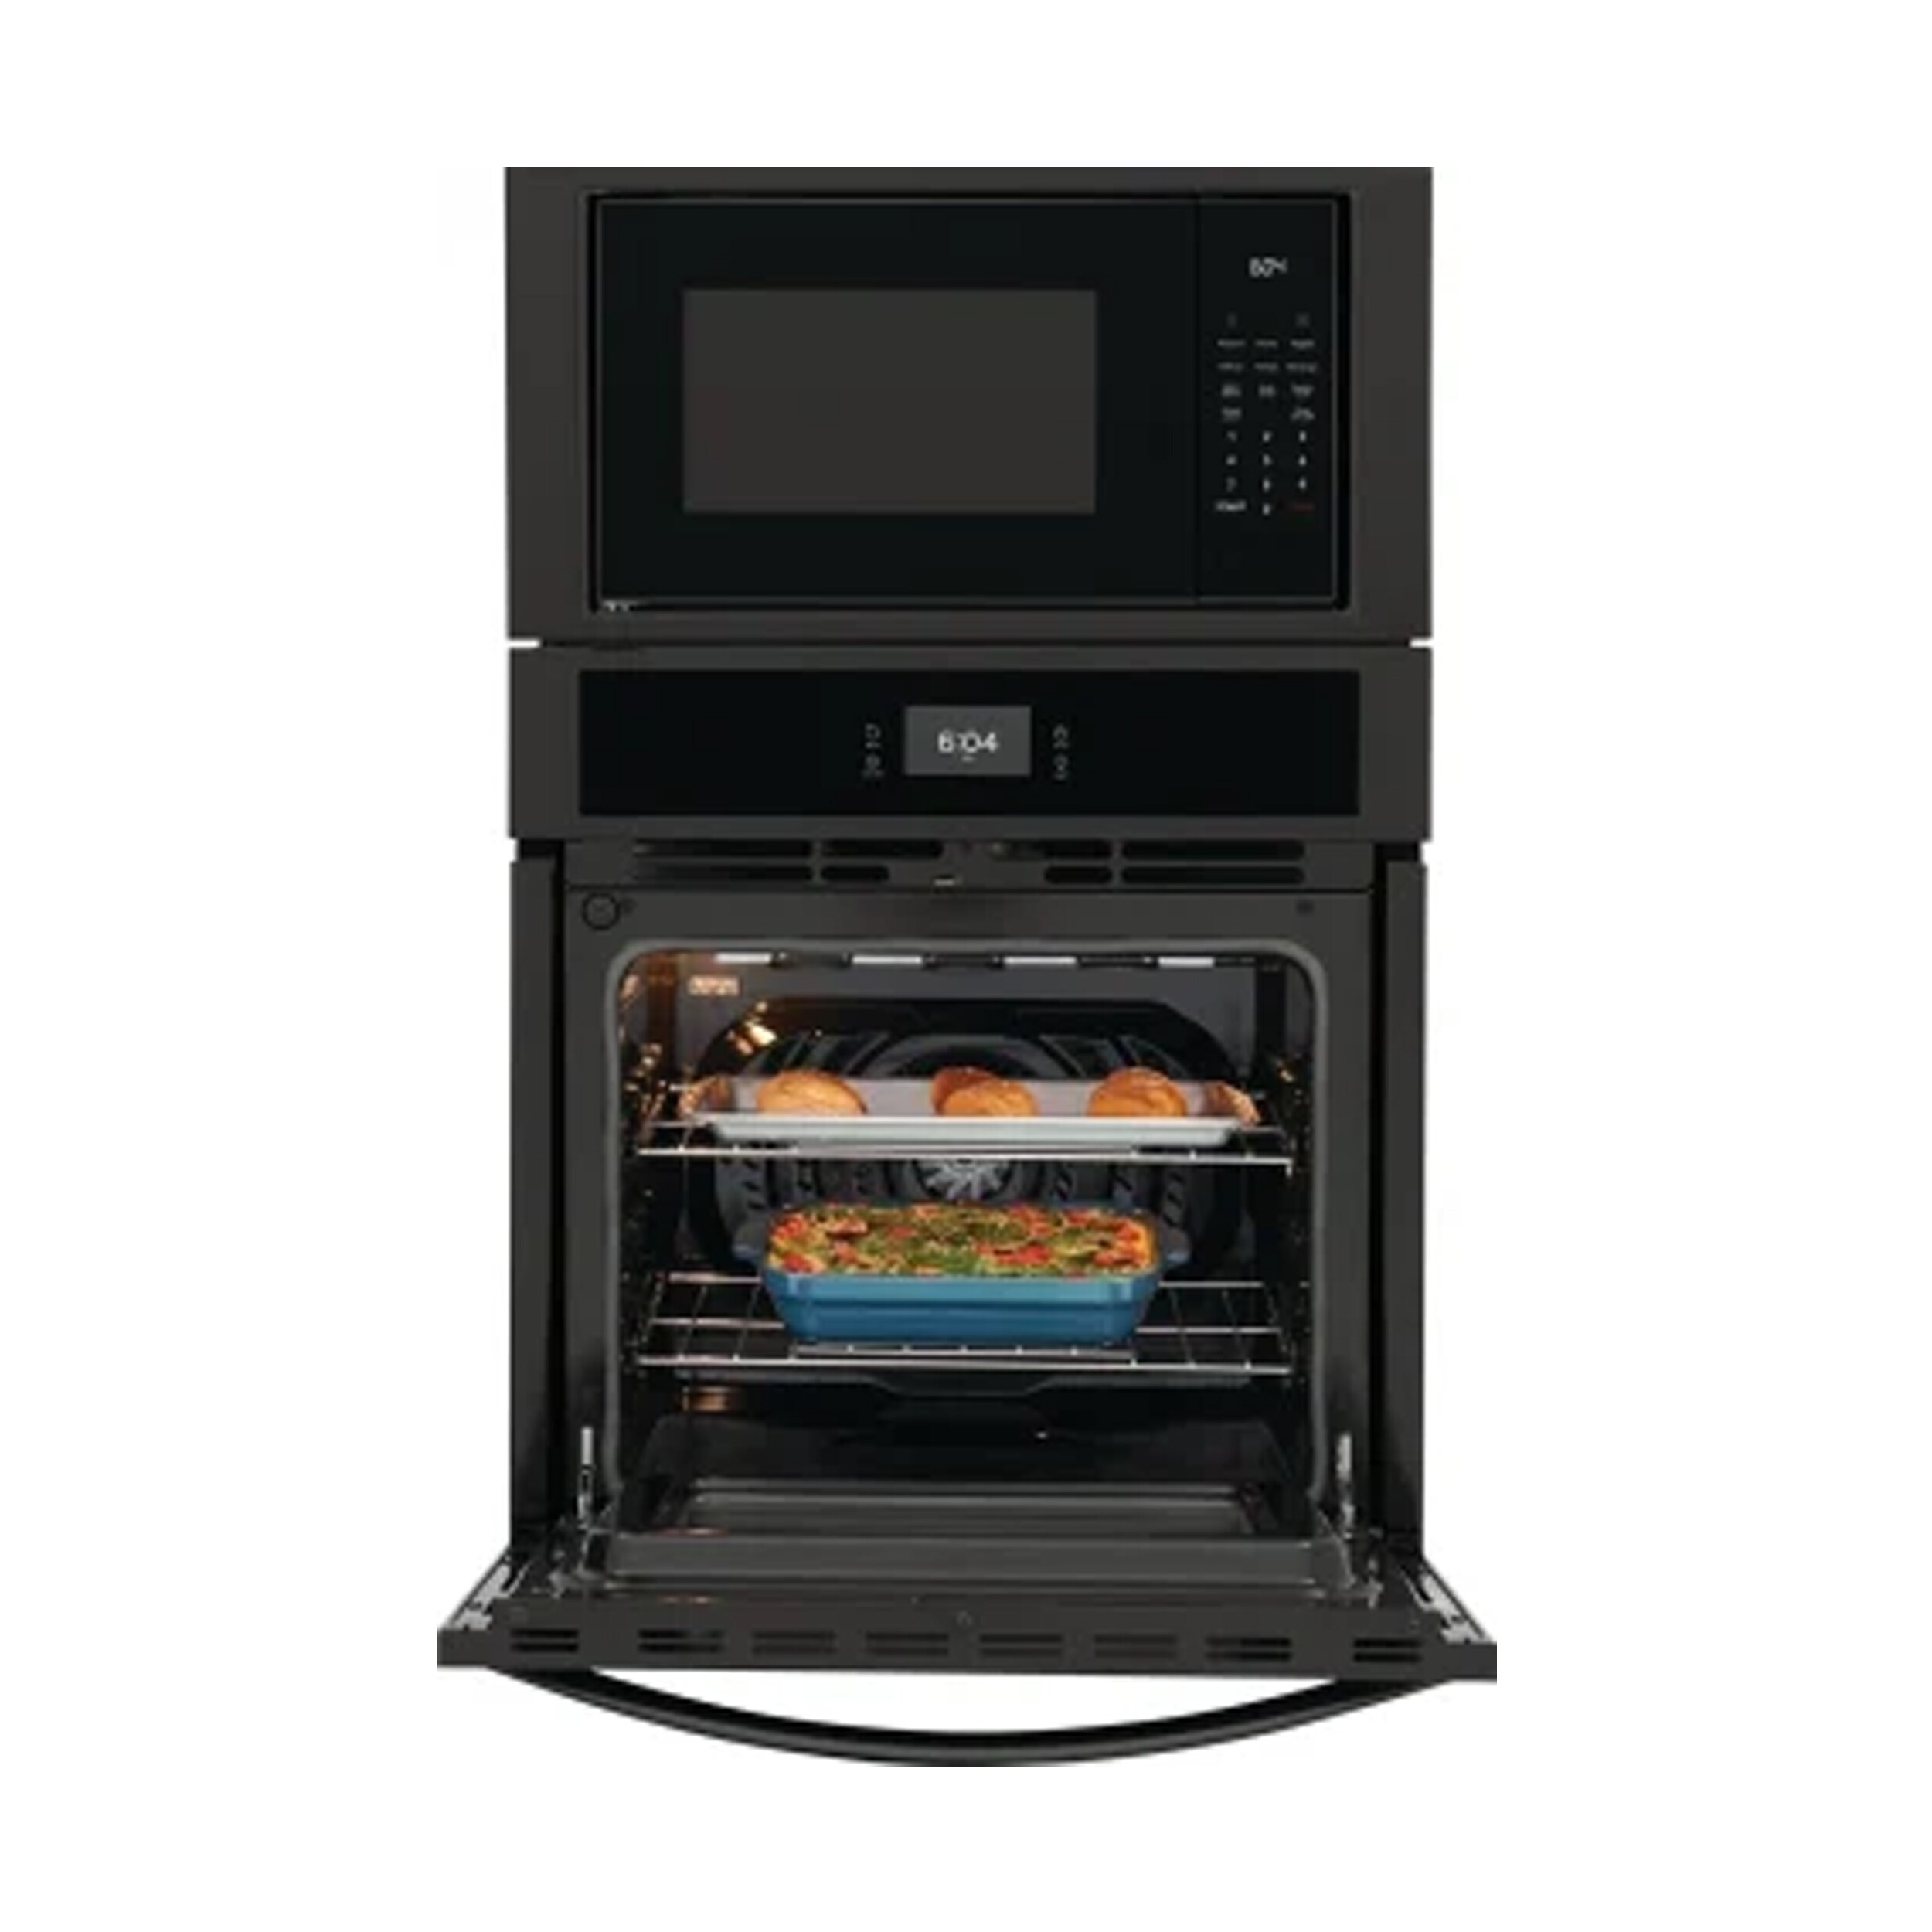 Frigidaire 27IN ELECTRIC WALL OVEN/MICROWAVE COMBINATION Option 2